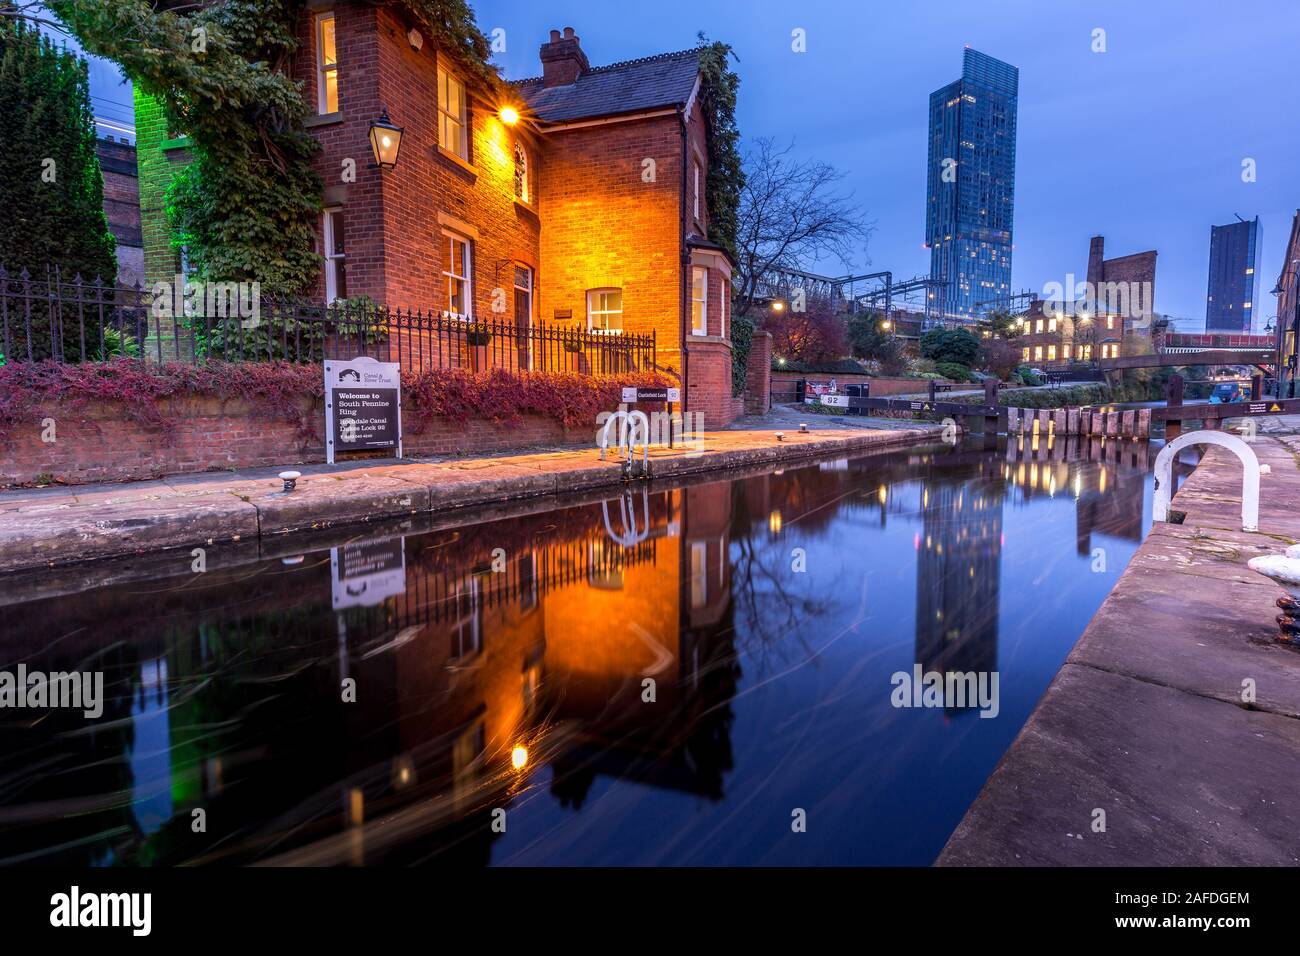 Deansgate Lock, Manchester Stock Photo